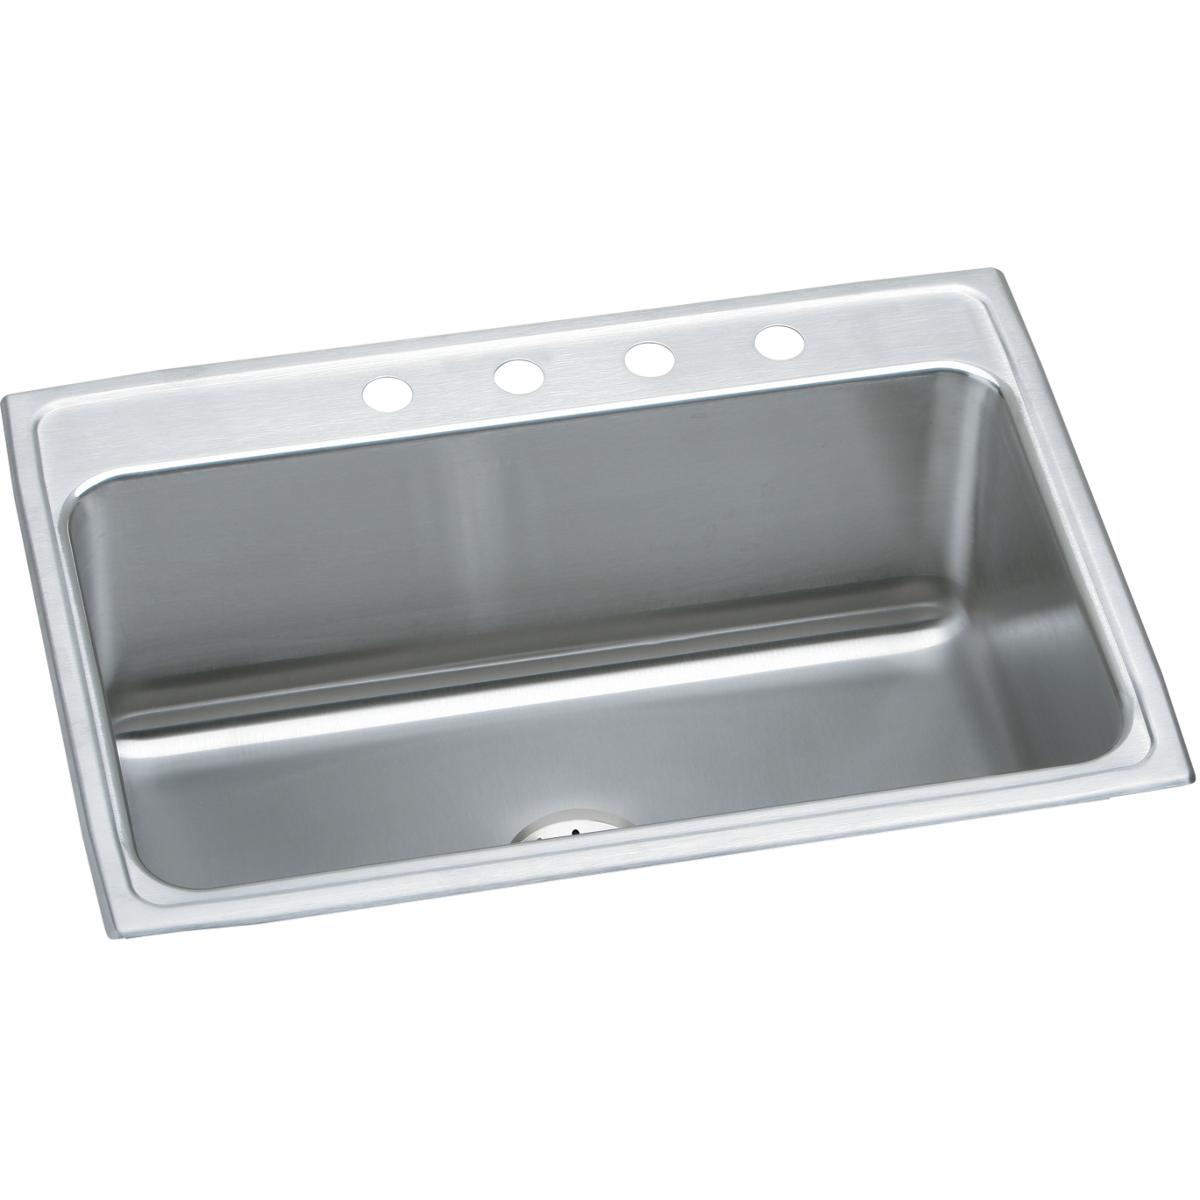 Elkay Lustertone Classic 31" x 22" x 10-1/8" Single Bowl Drop-in Stainless Steel Sink with Perfect Drain